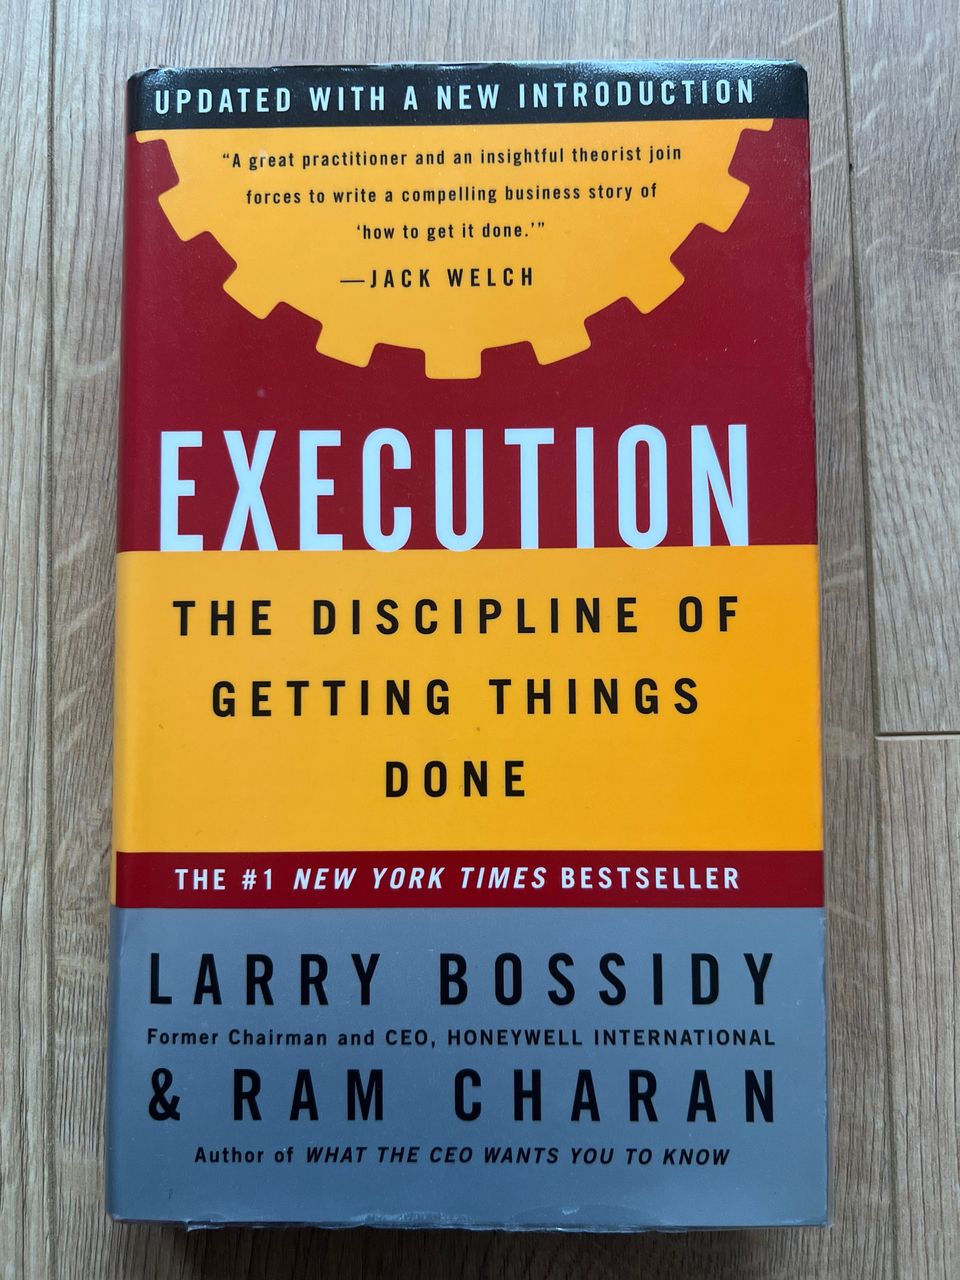 Larry Bossidy & Ram Charan - Execution The Discipline of Getting Things Done